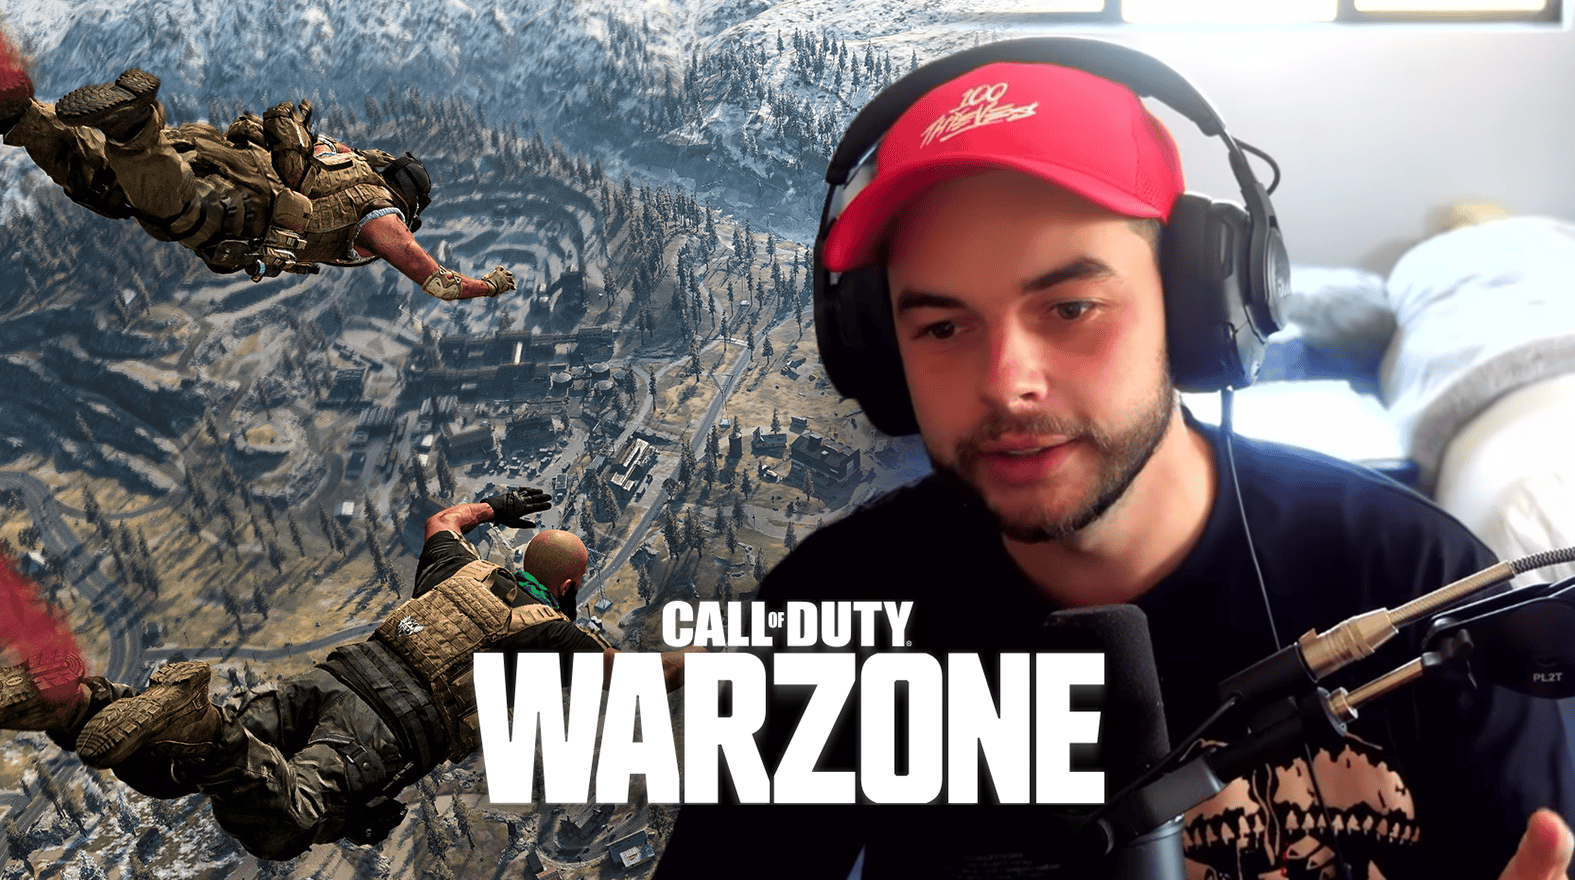 Call of Duty Warzone dropping in / Nadeshot playing Warzone while live on Twitch